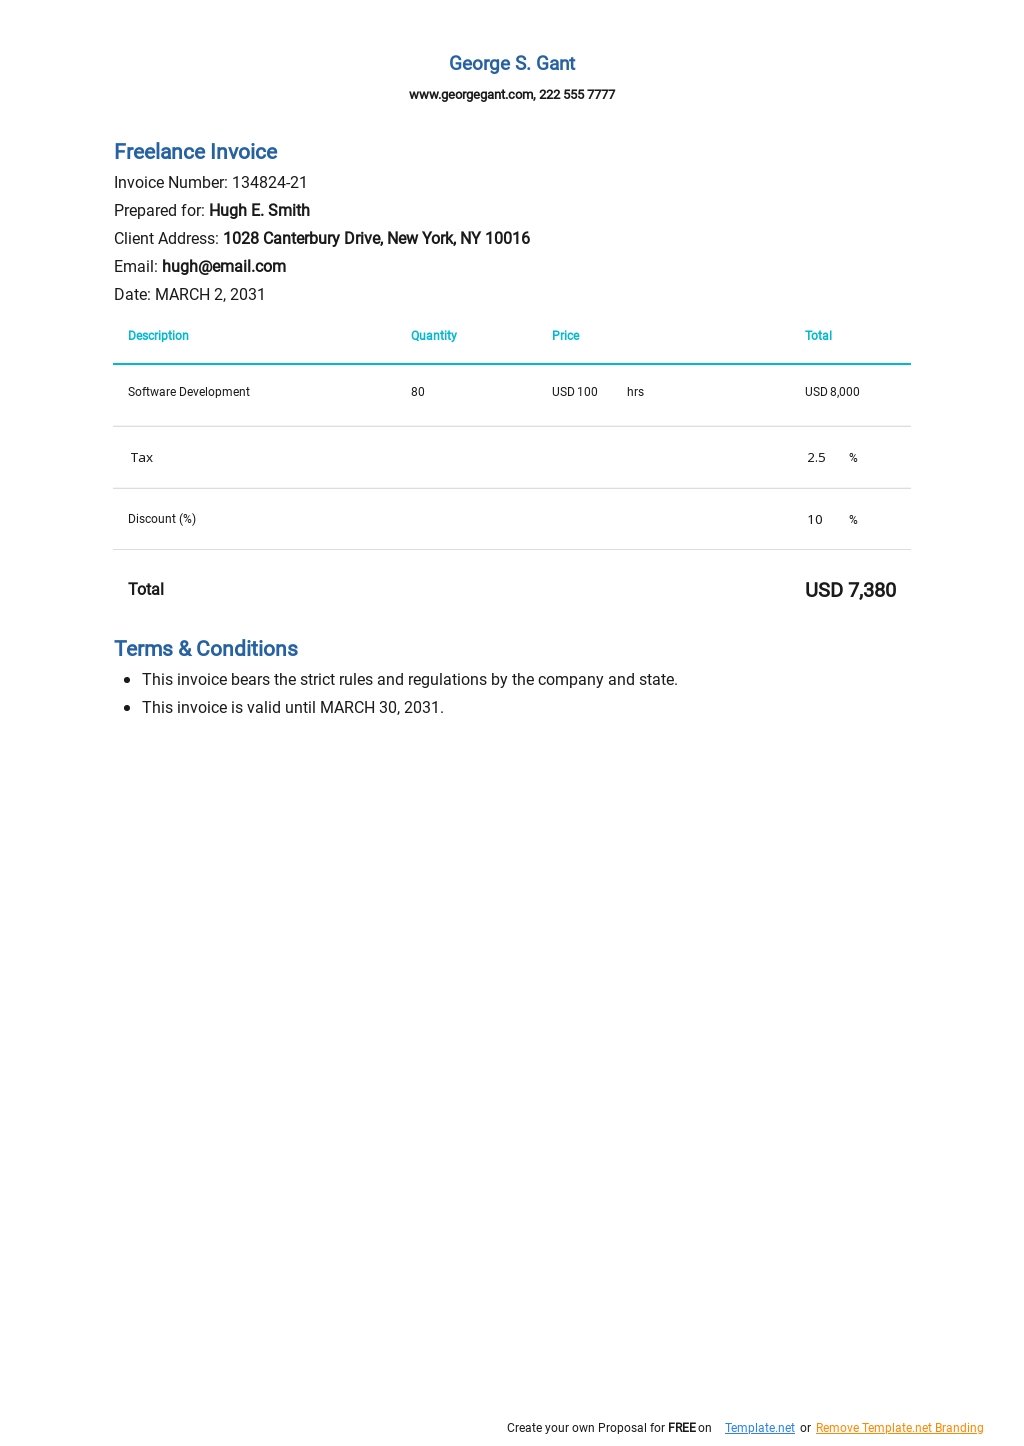 Freelance Invoice Form Template in Google Docs, Google Sheets, Excel